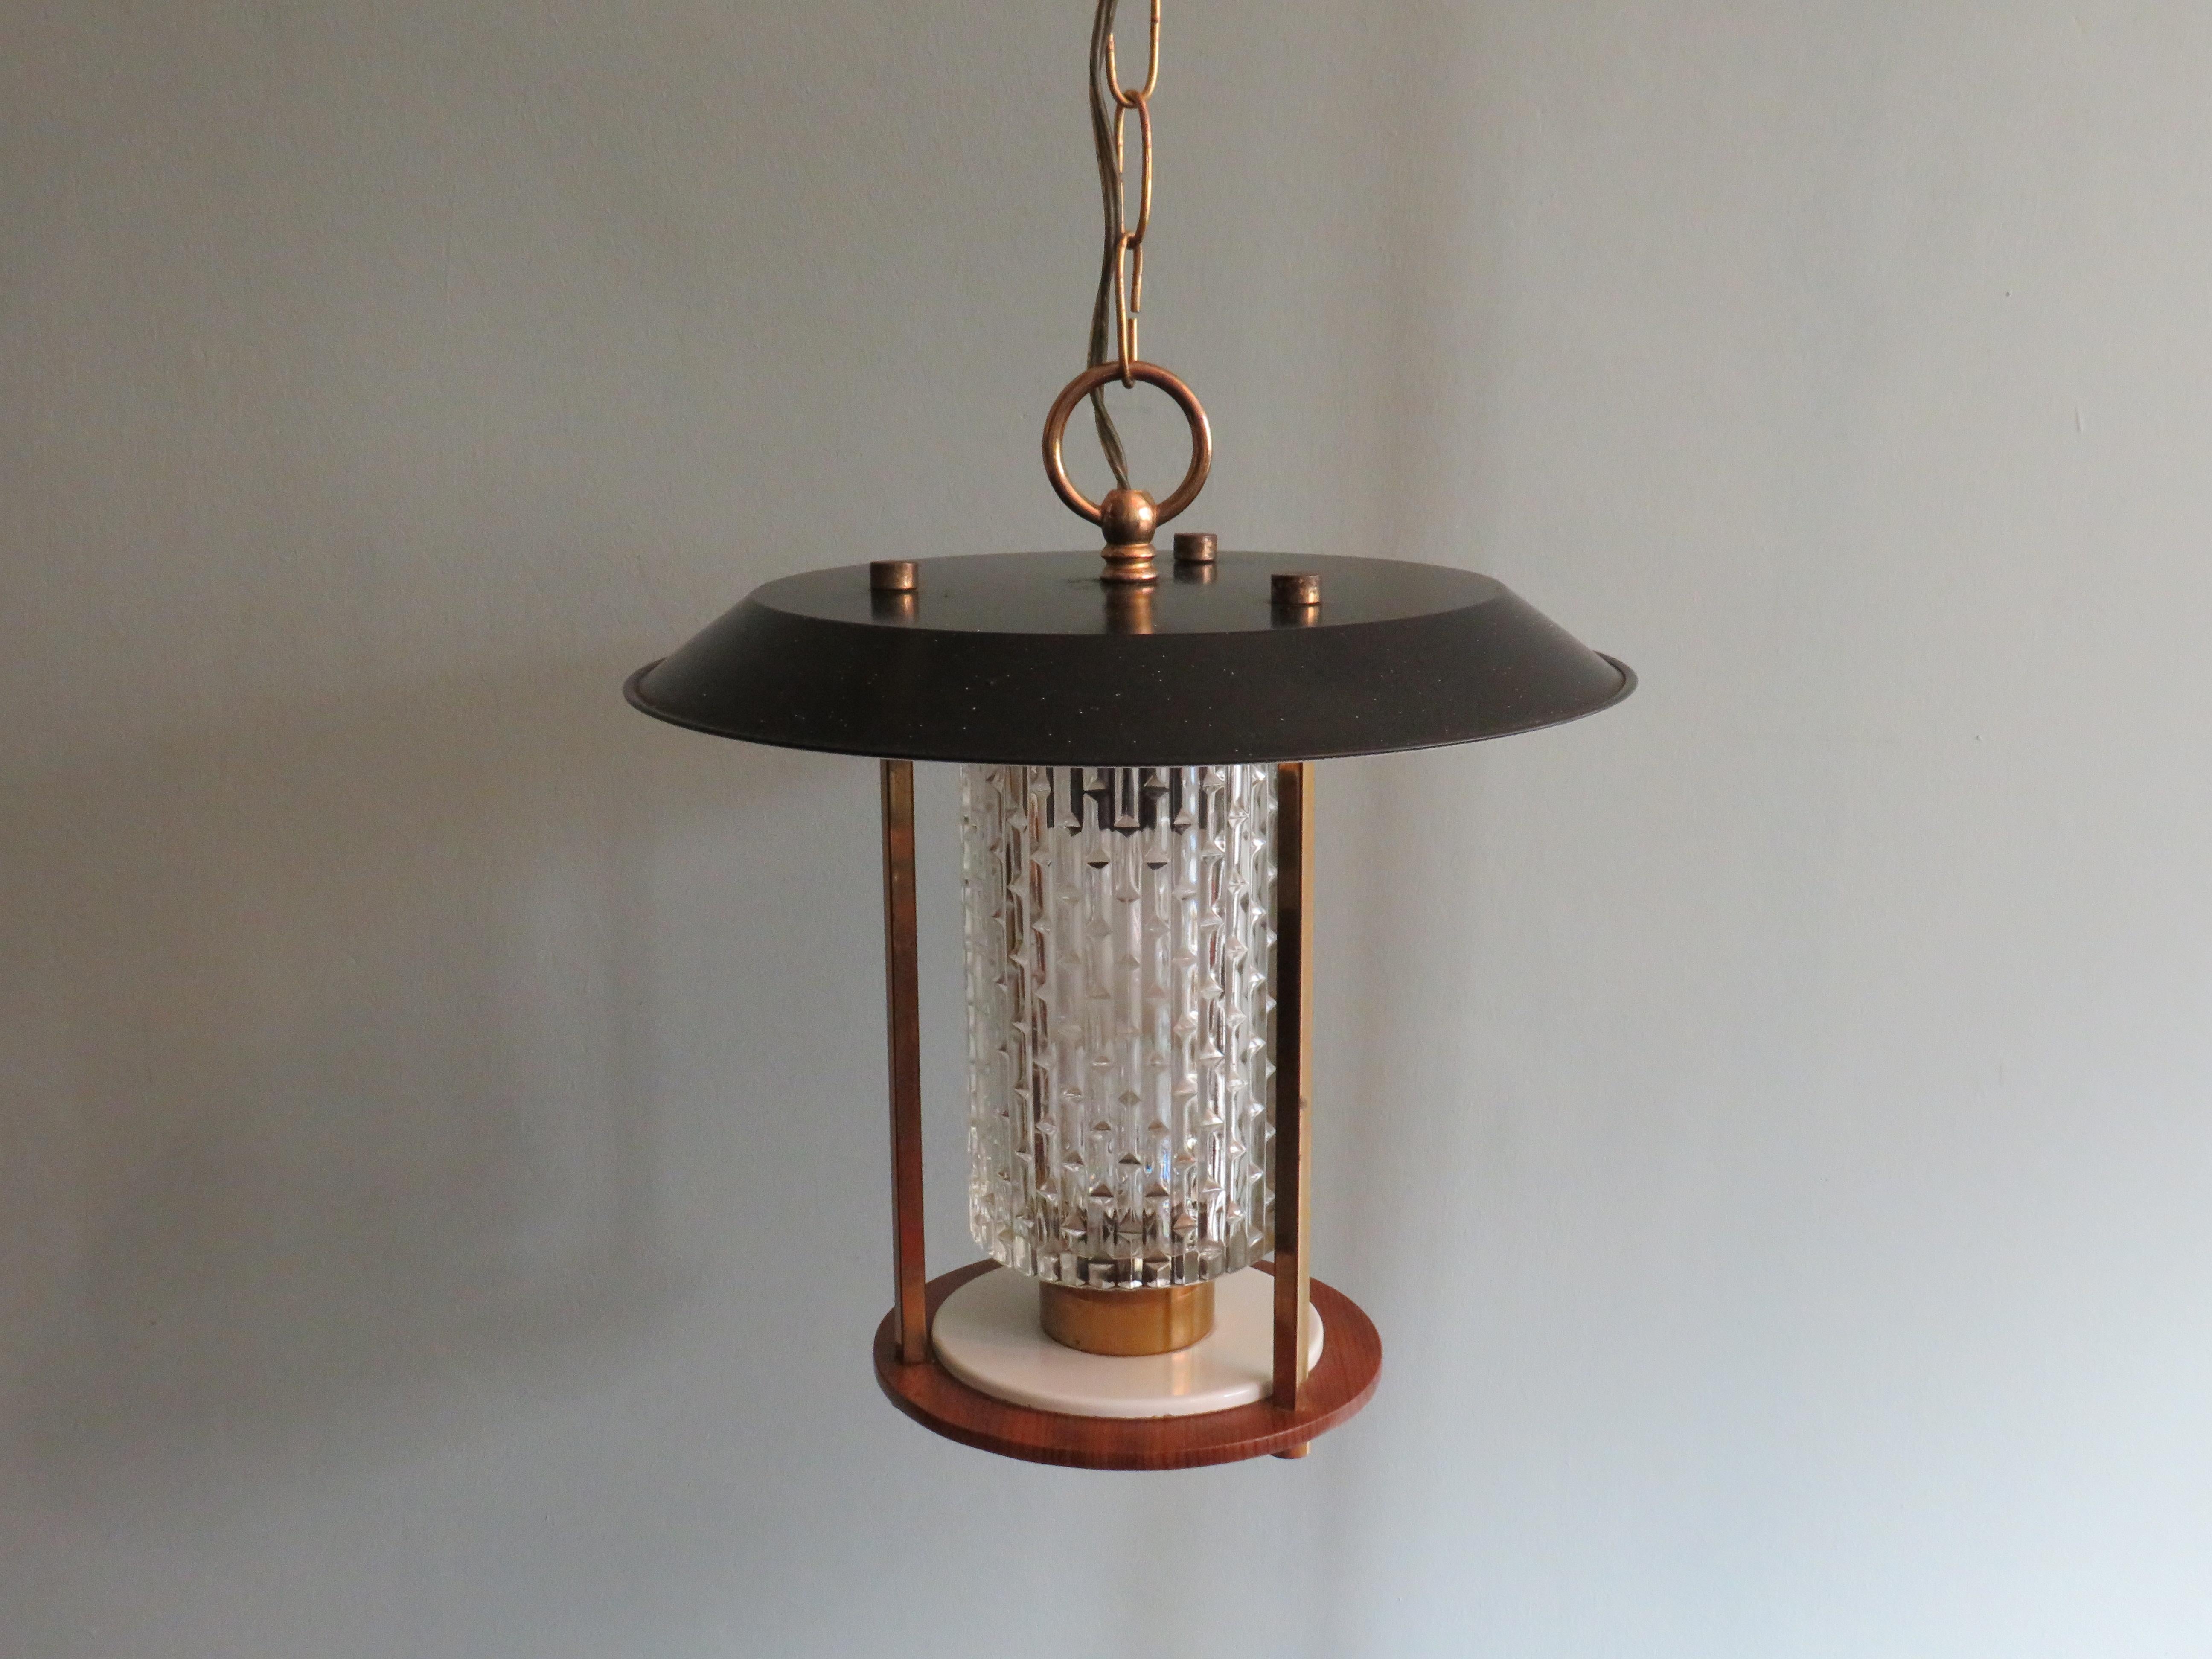 This round French lantern consists of a teak wooden plateau, a glass chalice with a graphic motif and a black metal cover plate.
The frame and suspension are made of brass.
The lamp is provided with 1 E 27 fitting and a complete suspension